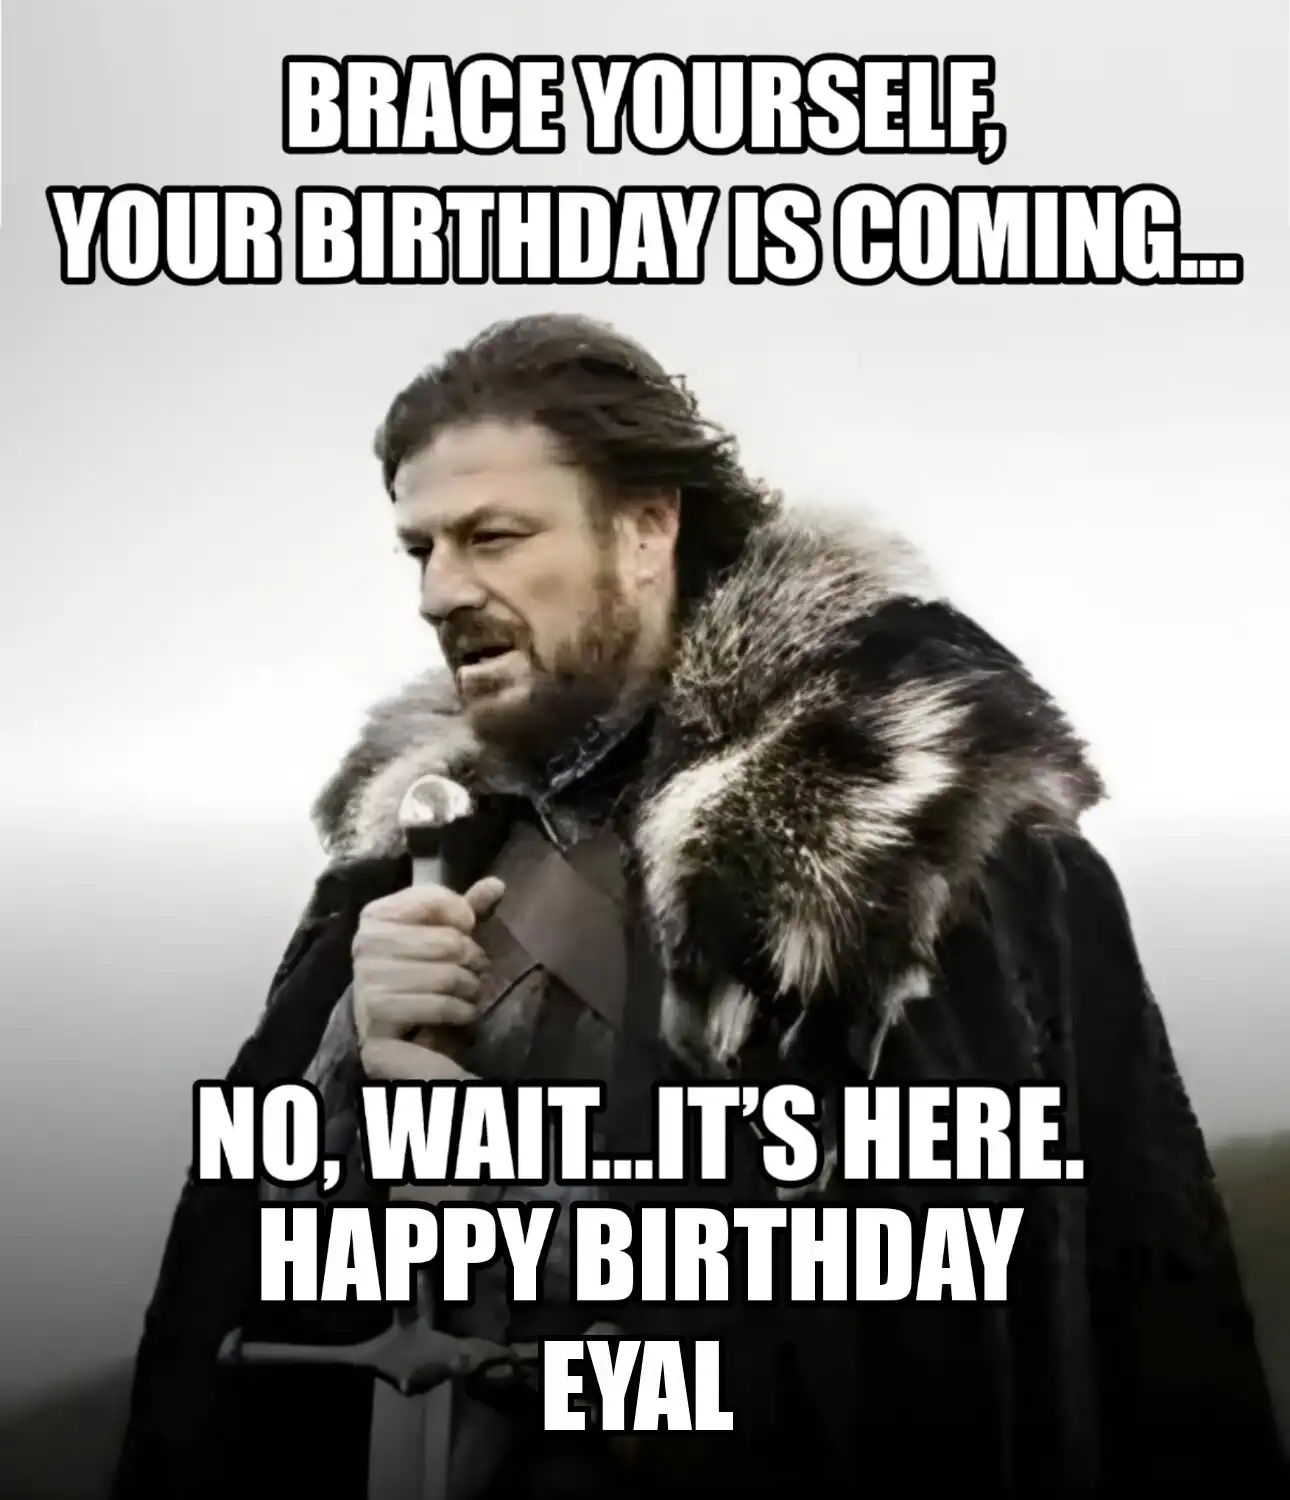 Happy Birthday Eyal Brace Yourself Your Birthday Is Coming Meme